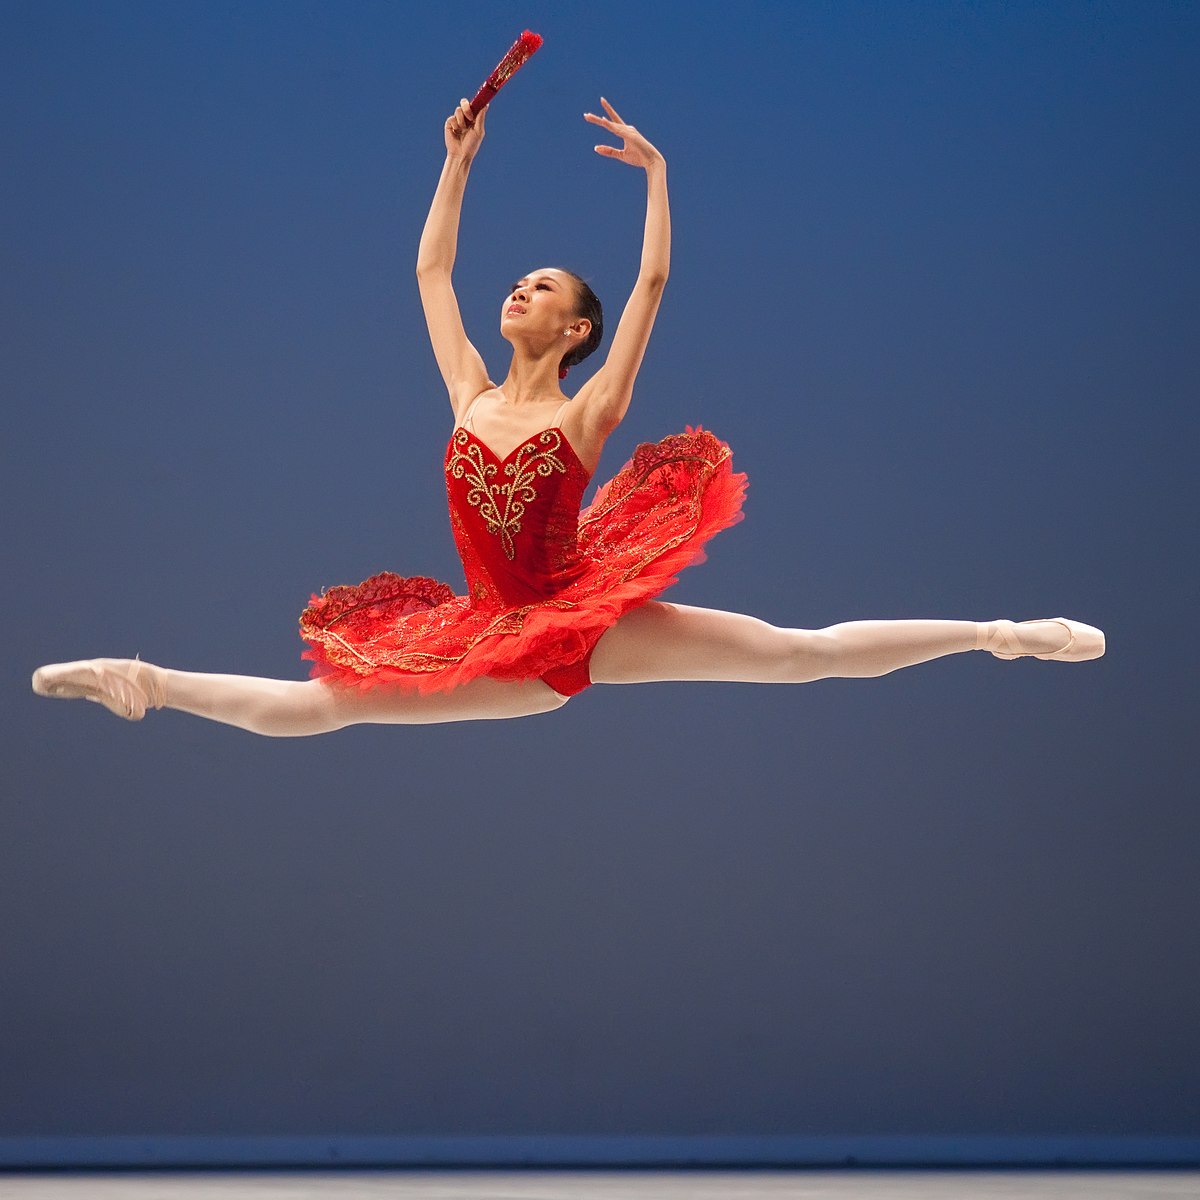 After Watching Leap, Ballerina. Leap, it's mean a large jump from